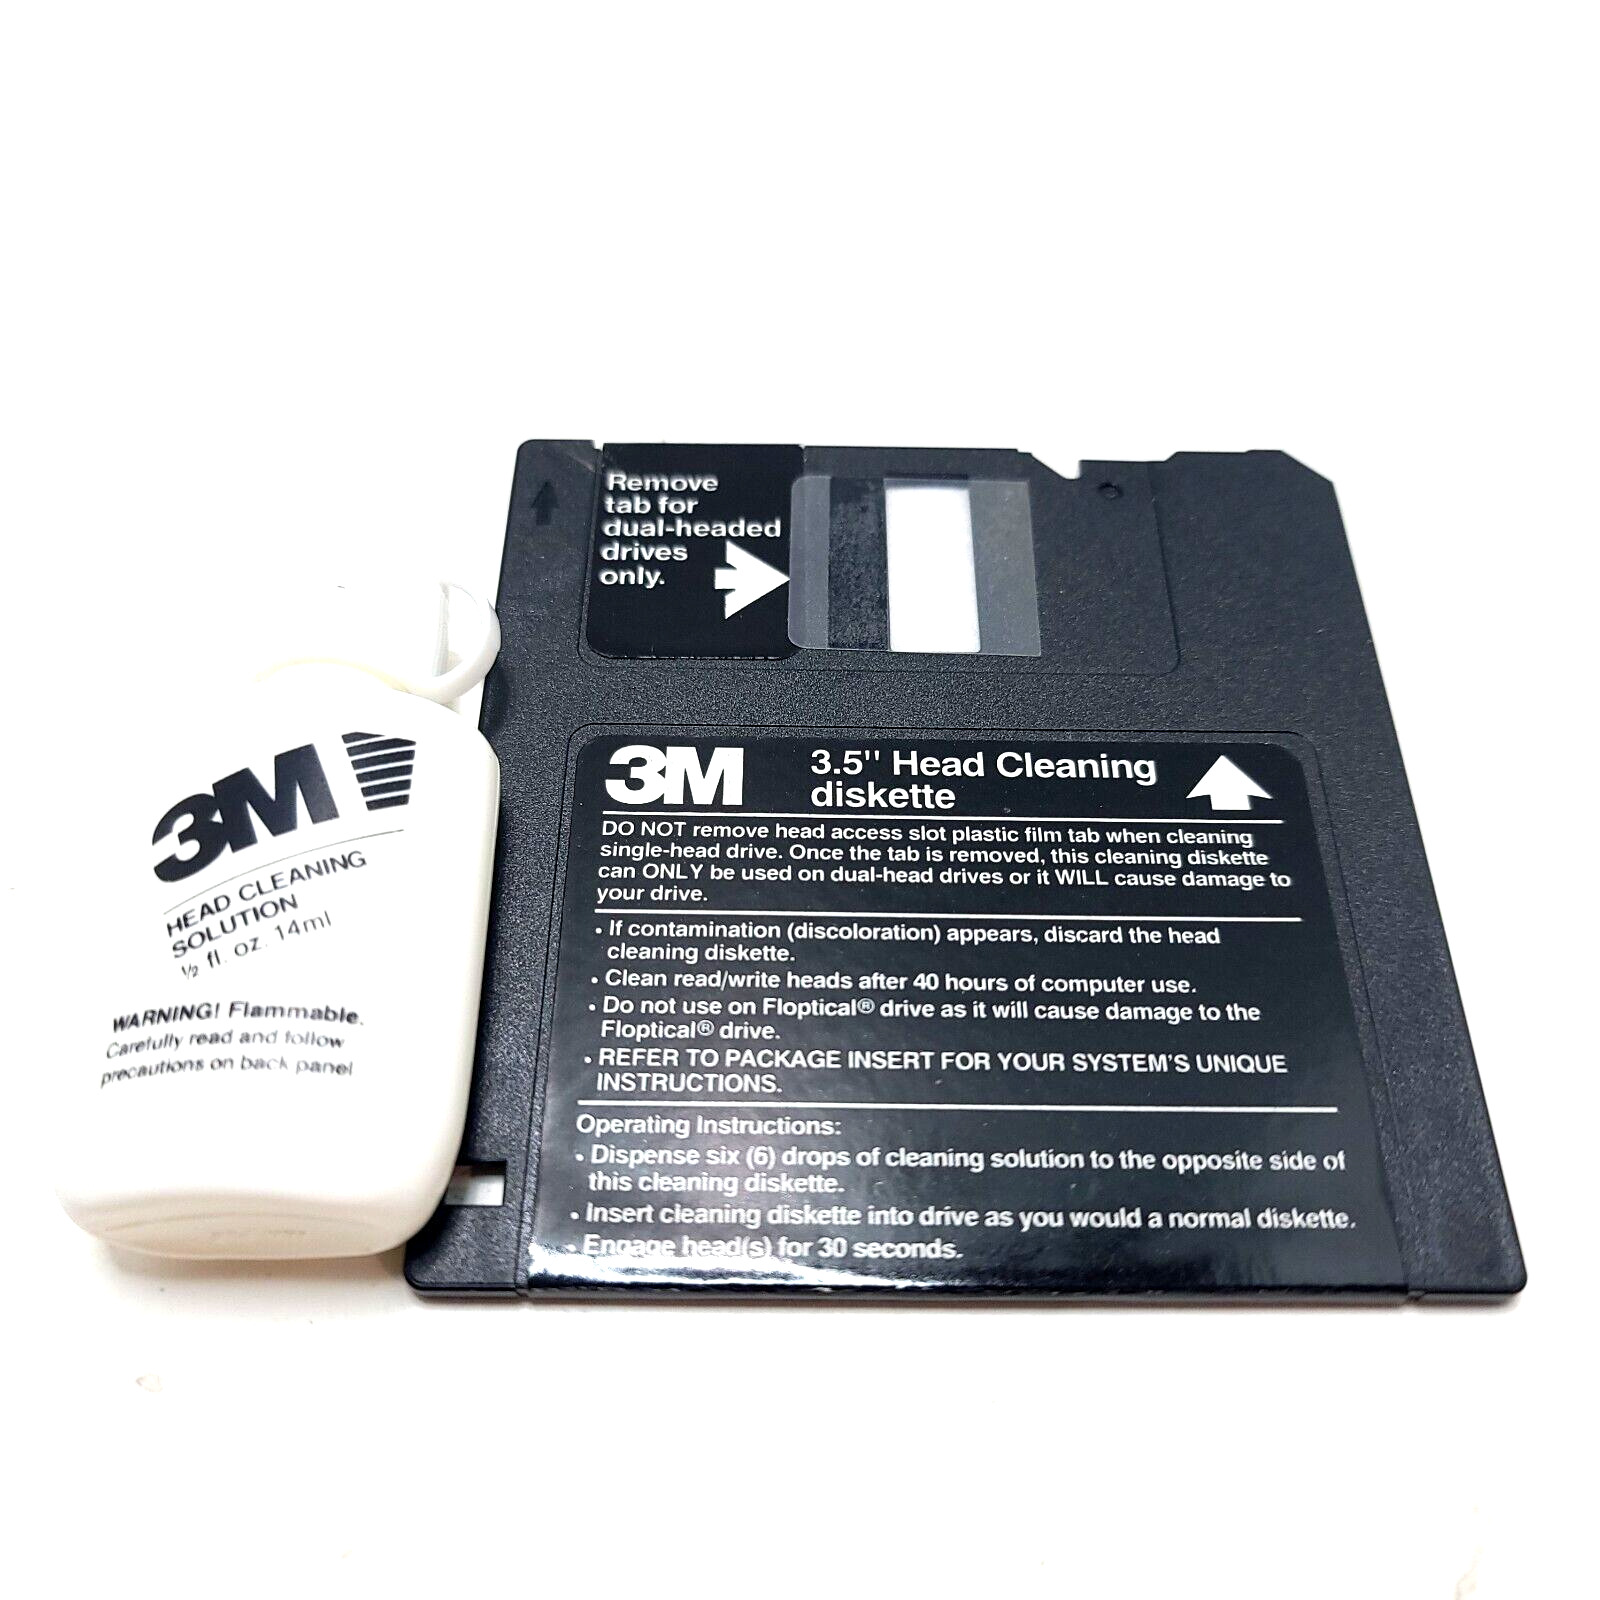 3M Head Cleaning Diskette Kit Pre-Owned Great Condition  *No Box*